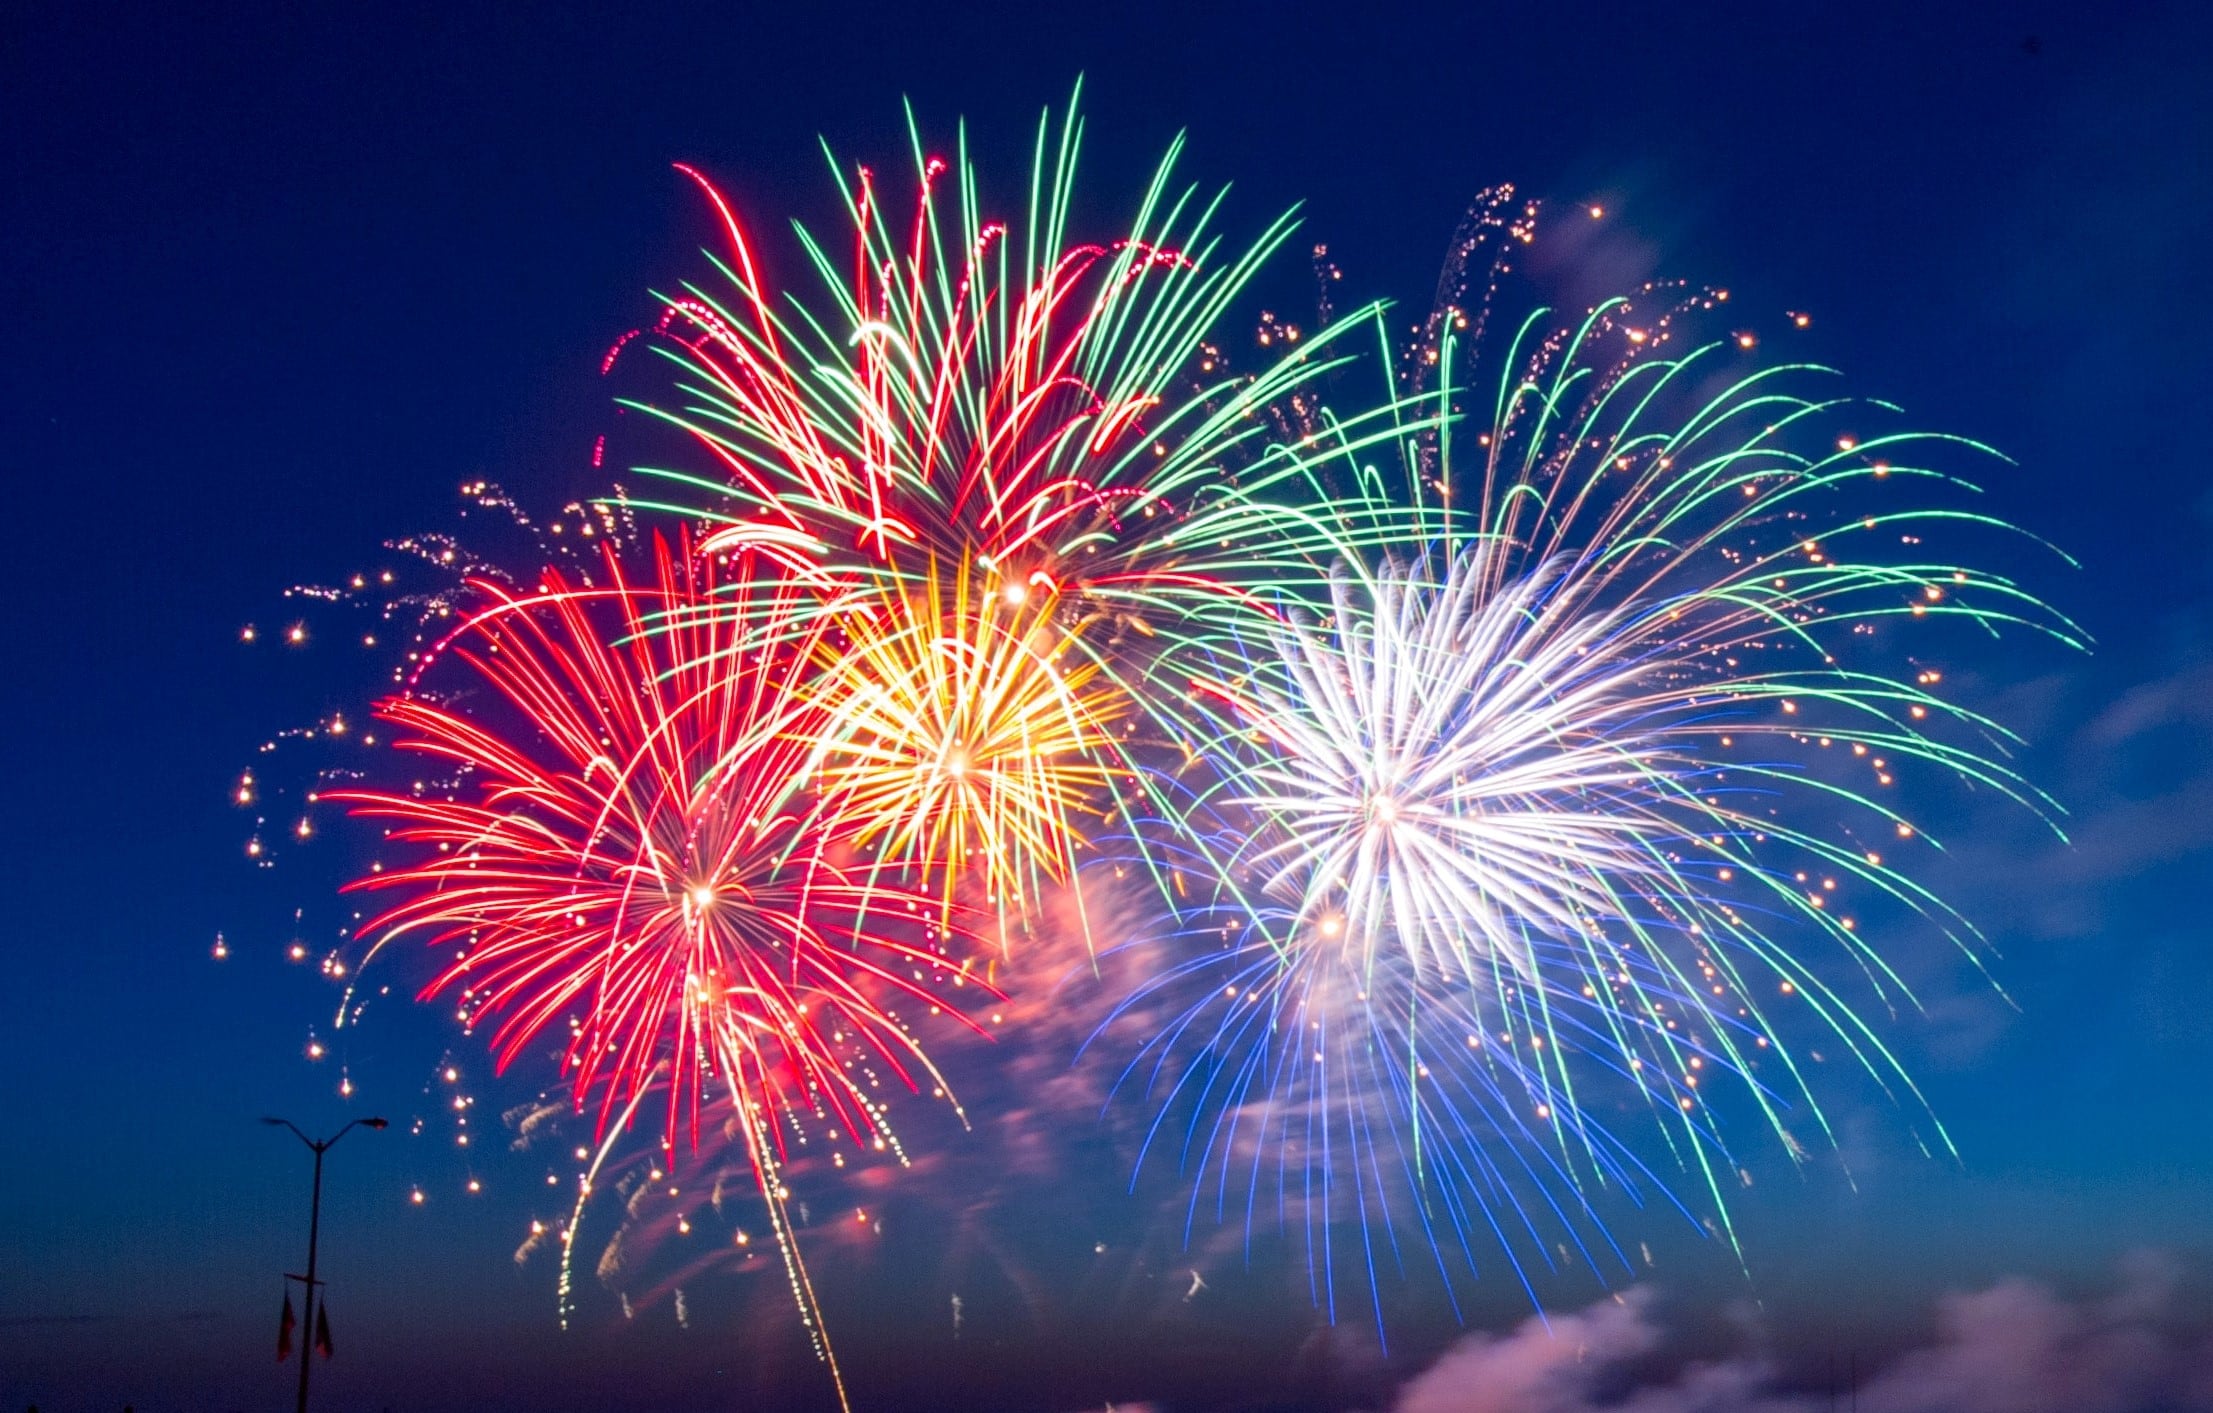 UPDATED: Fireworks, scavenger hunt on Canada Day – courtesy of the Rossland Museum